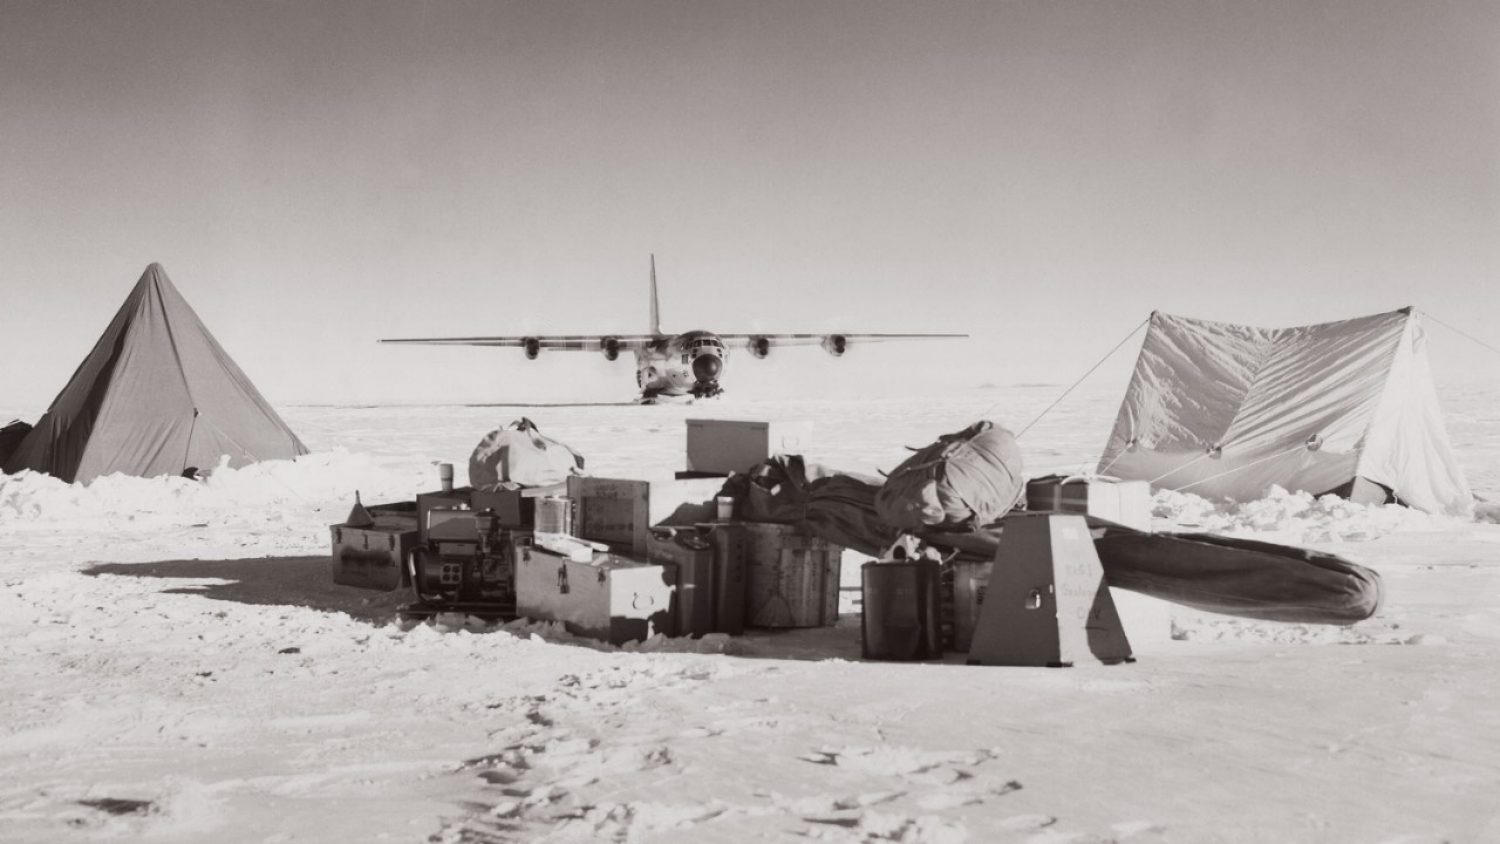 Tents and cargo on a snowfield with a plane in the background